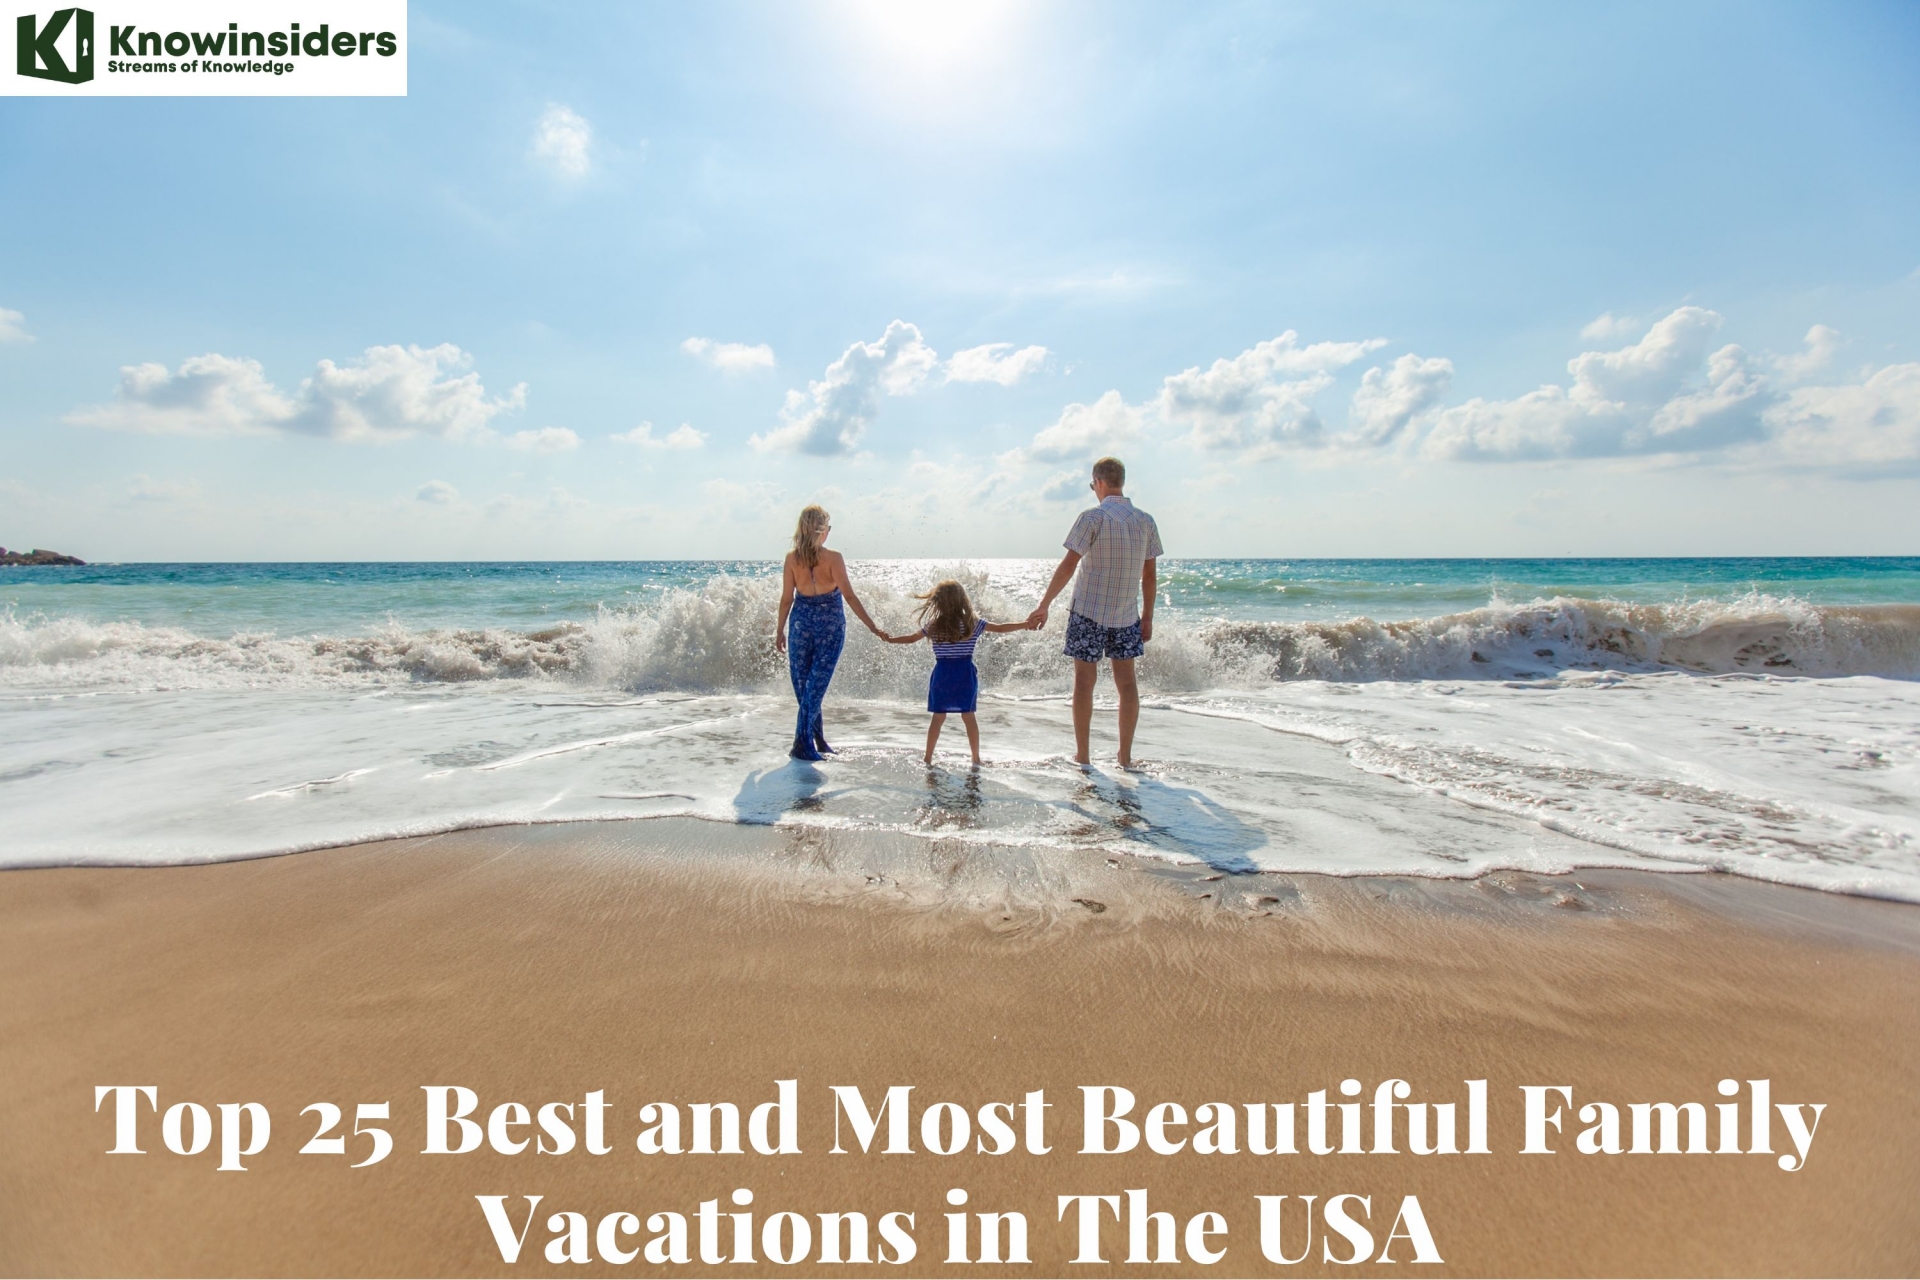 Top 25 Best and Most Beautiful Family Vacations in The USA